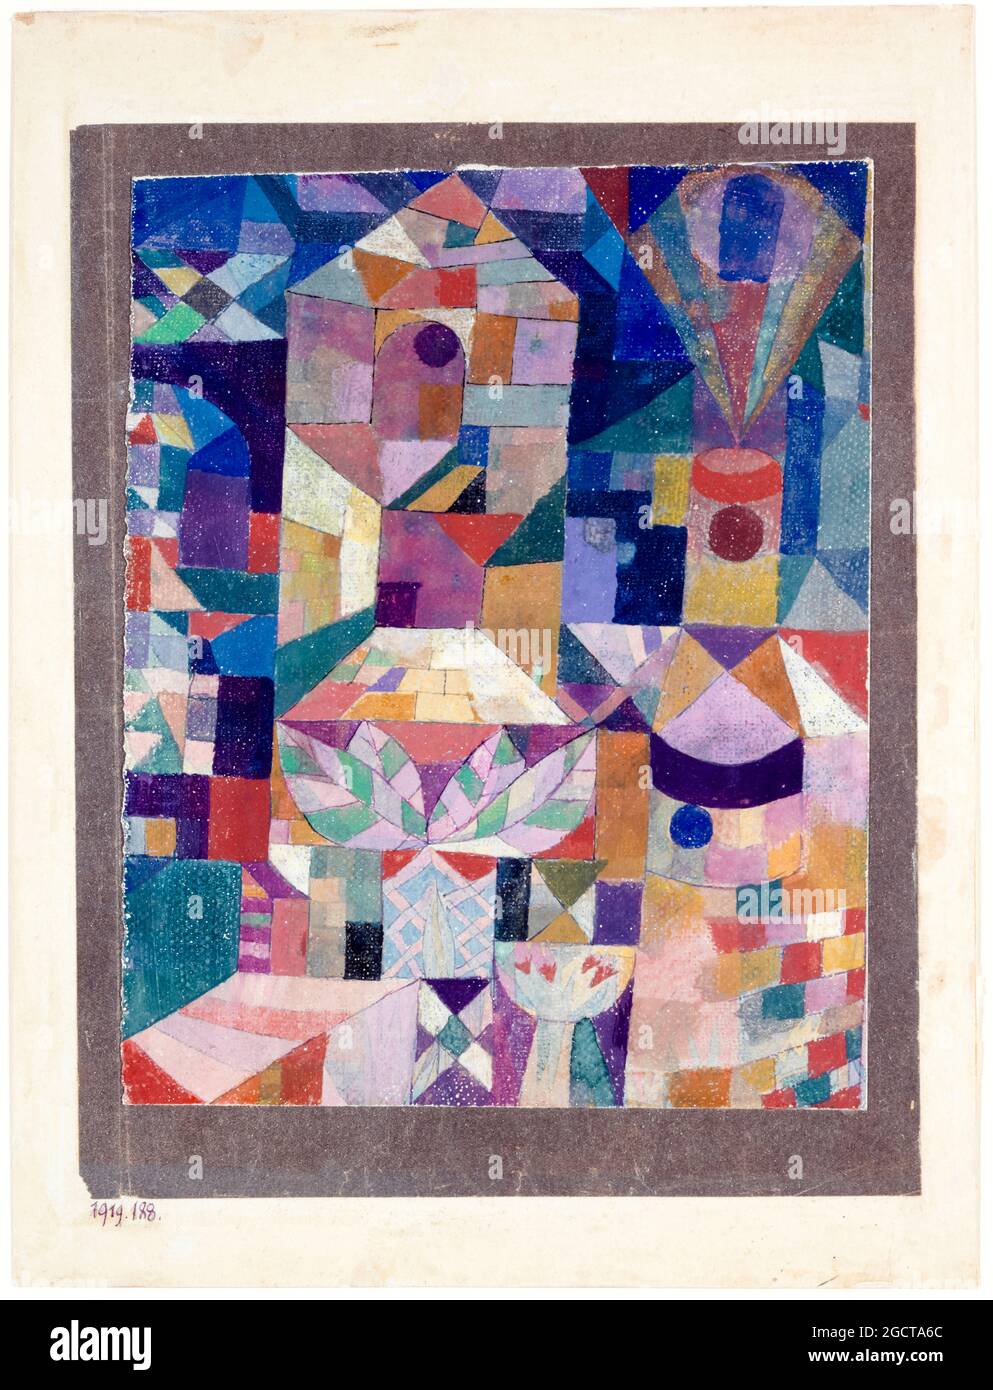 Paul Klee, Castle Garden, abstract painting, 1919 Stock Photo